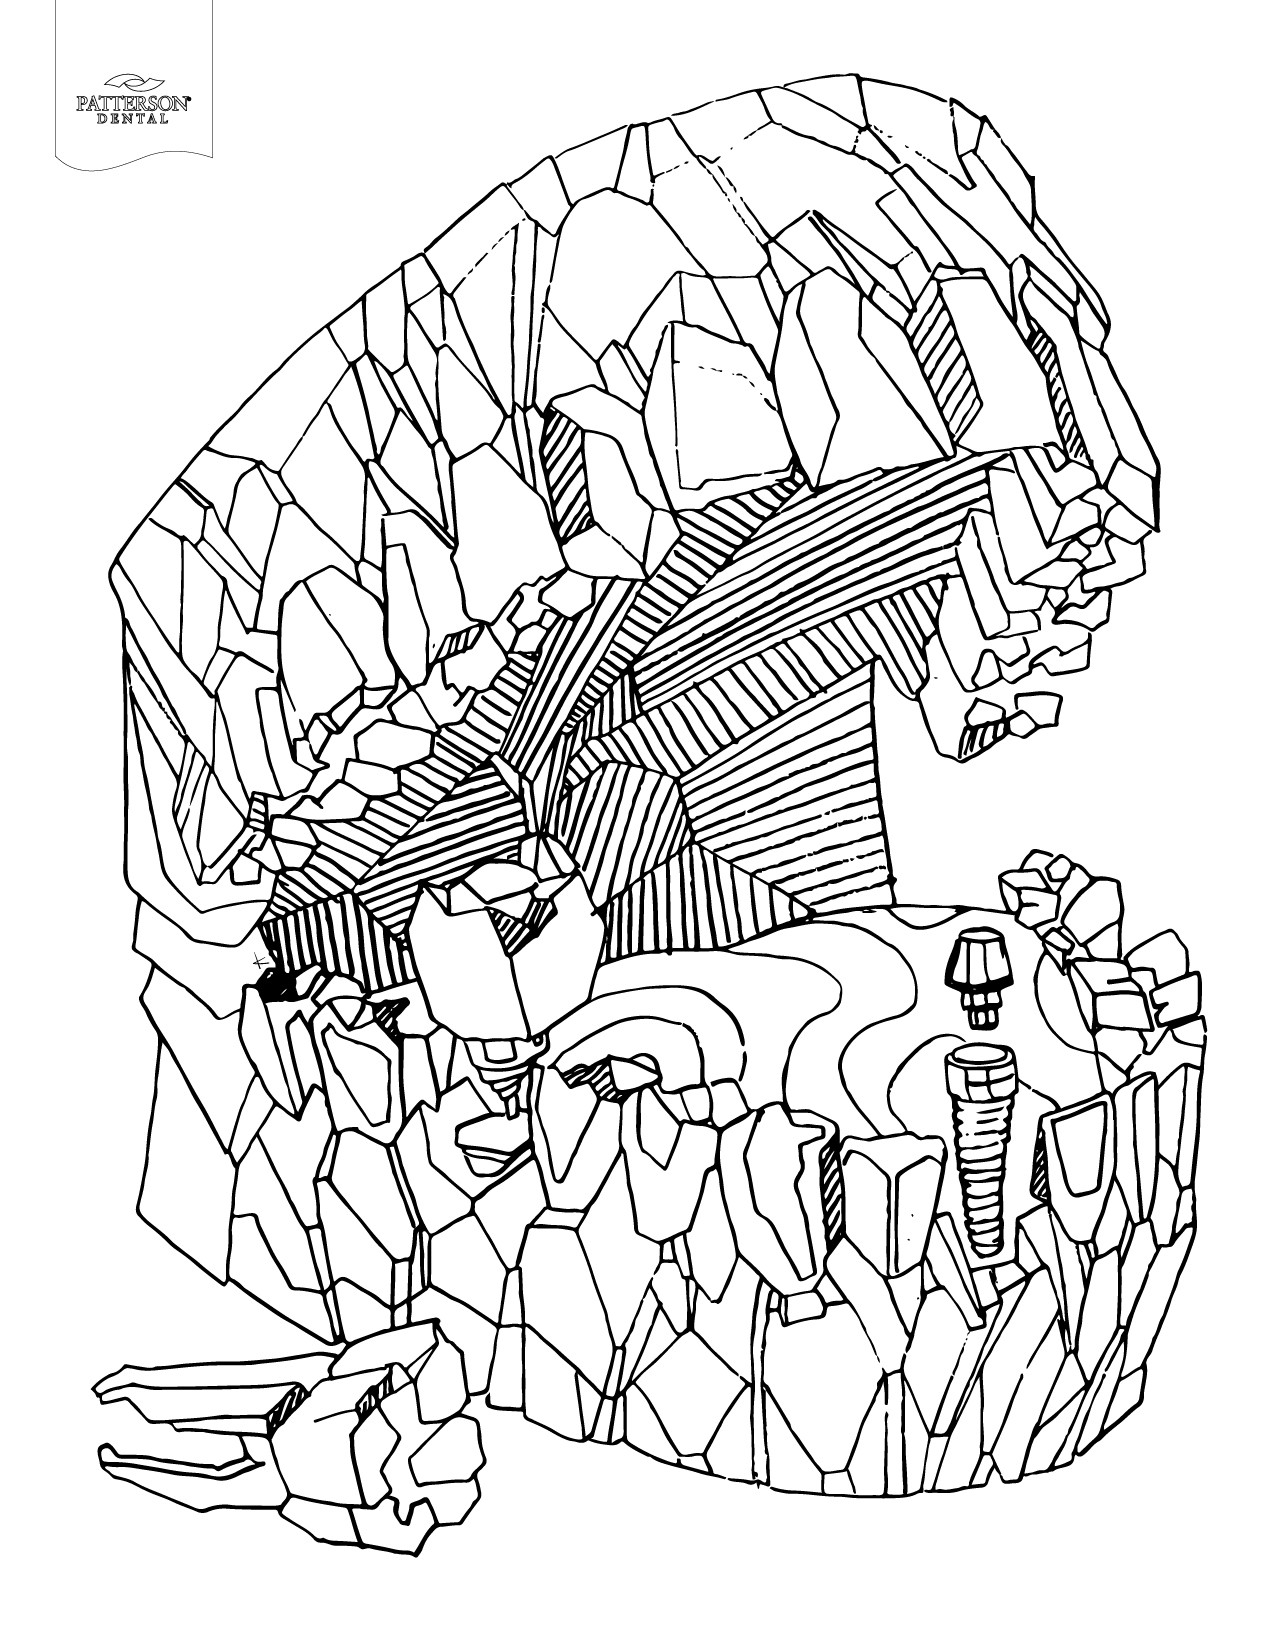 Adult Coloring Sheet
 10 Toothy Adult Coloring Pages [Printable] f The Cusp